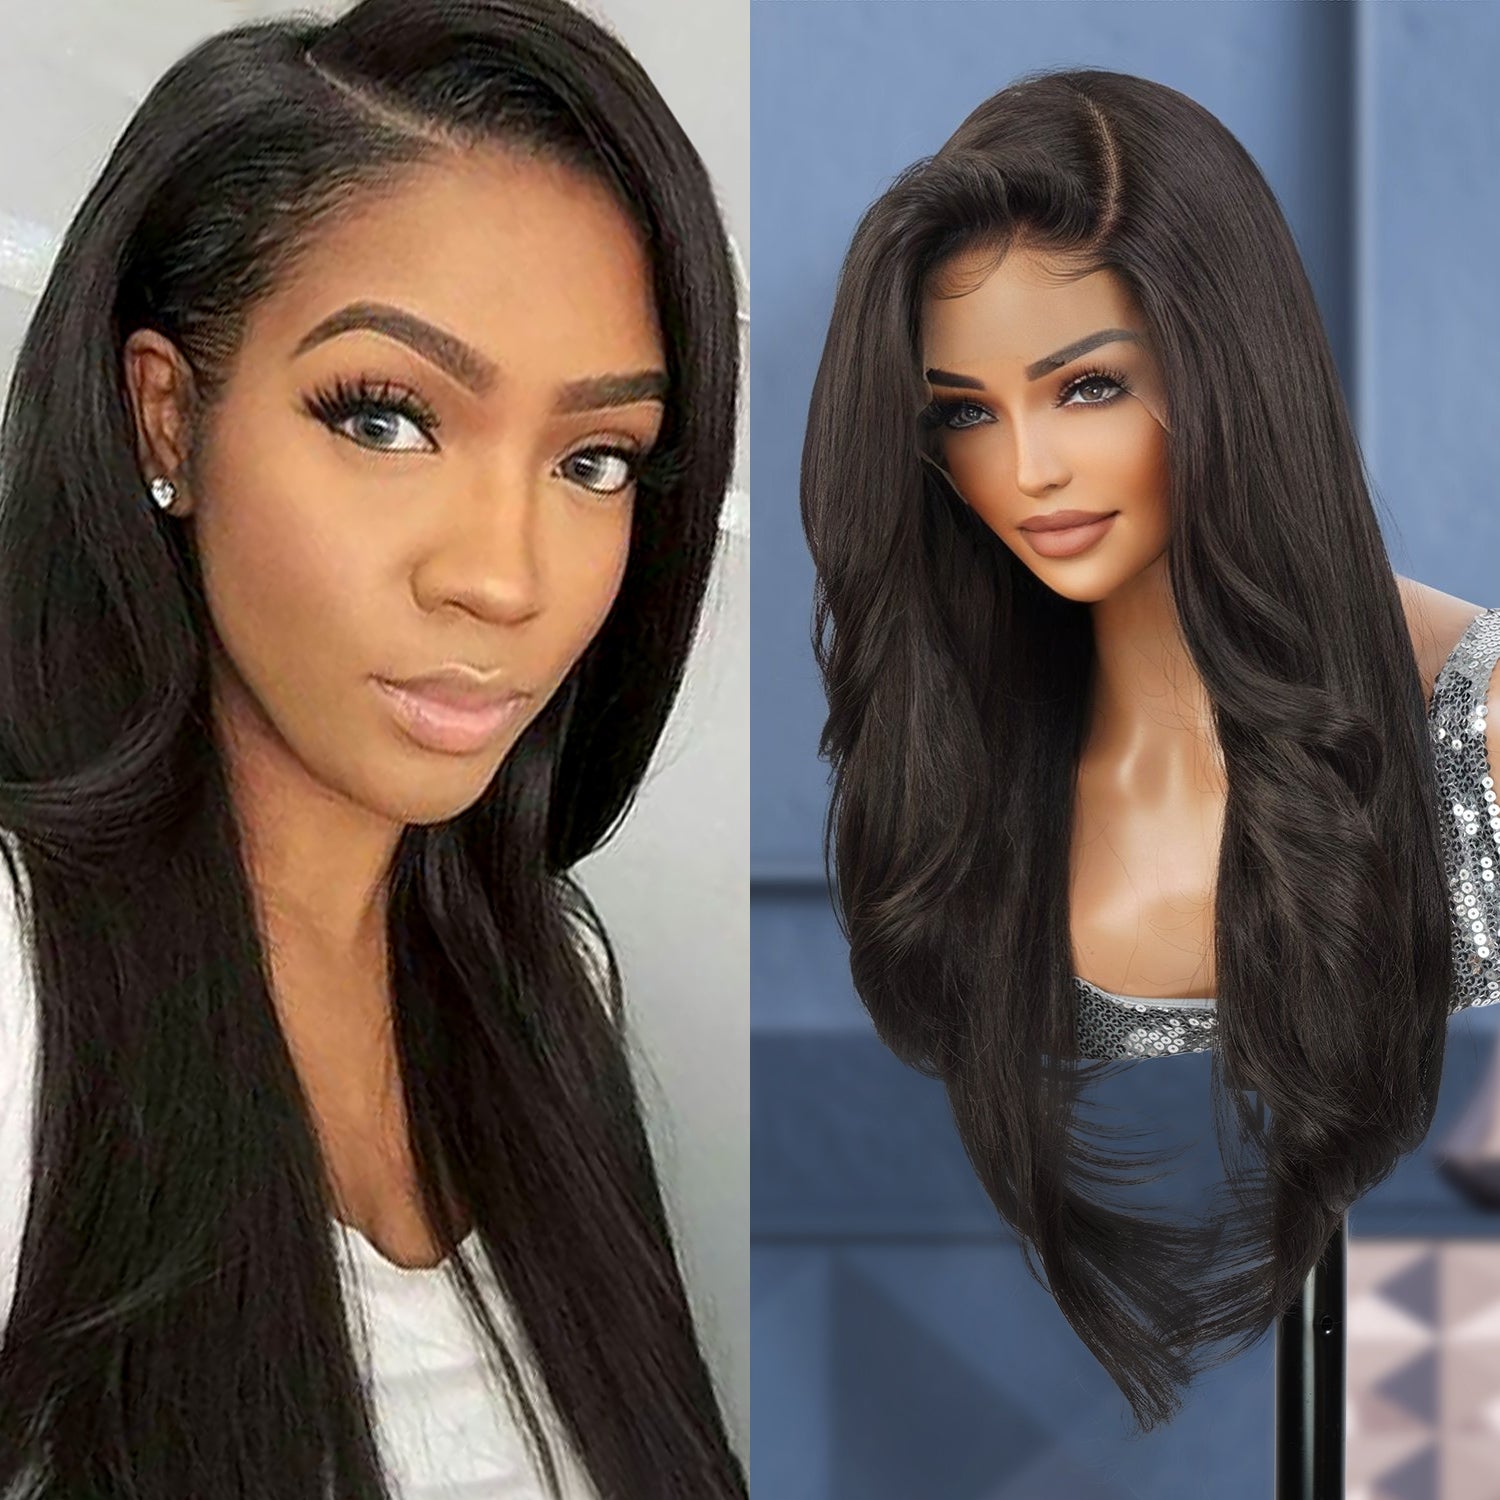 Multi-Parting, 13X6, Human Hair Blend, Frontal Wig, Invisible Lace, Pre-Plucked, Textured Wig, Yaki Textured, Face-Frame Layers, Long-Layered Wig, Blowout Texture, 